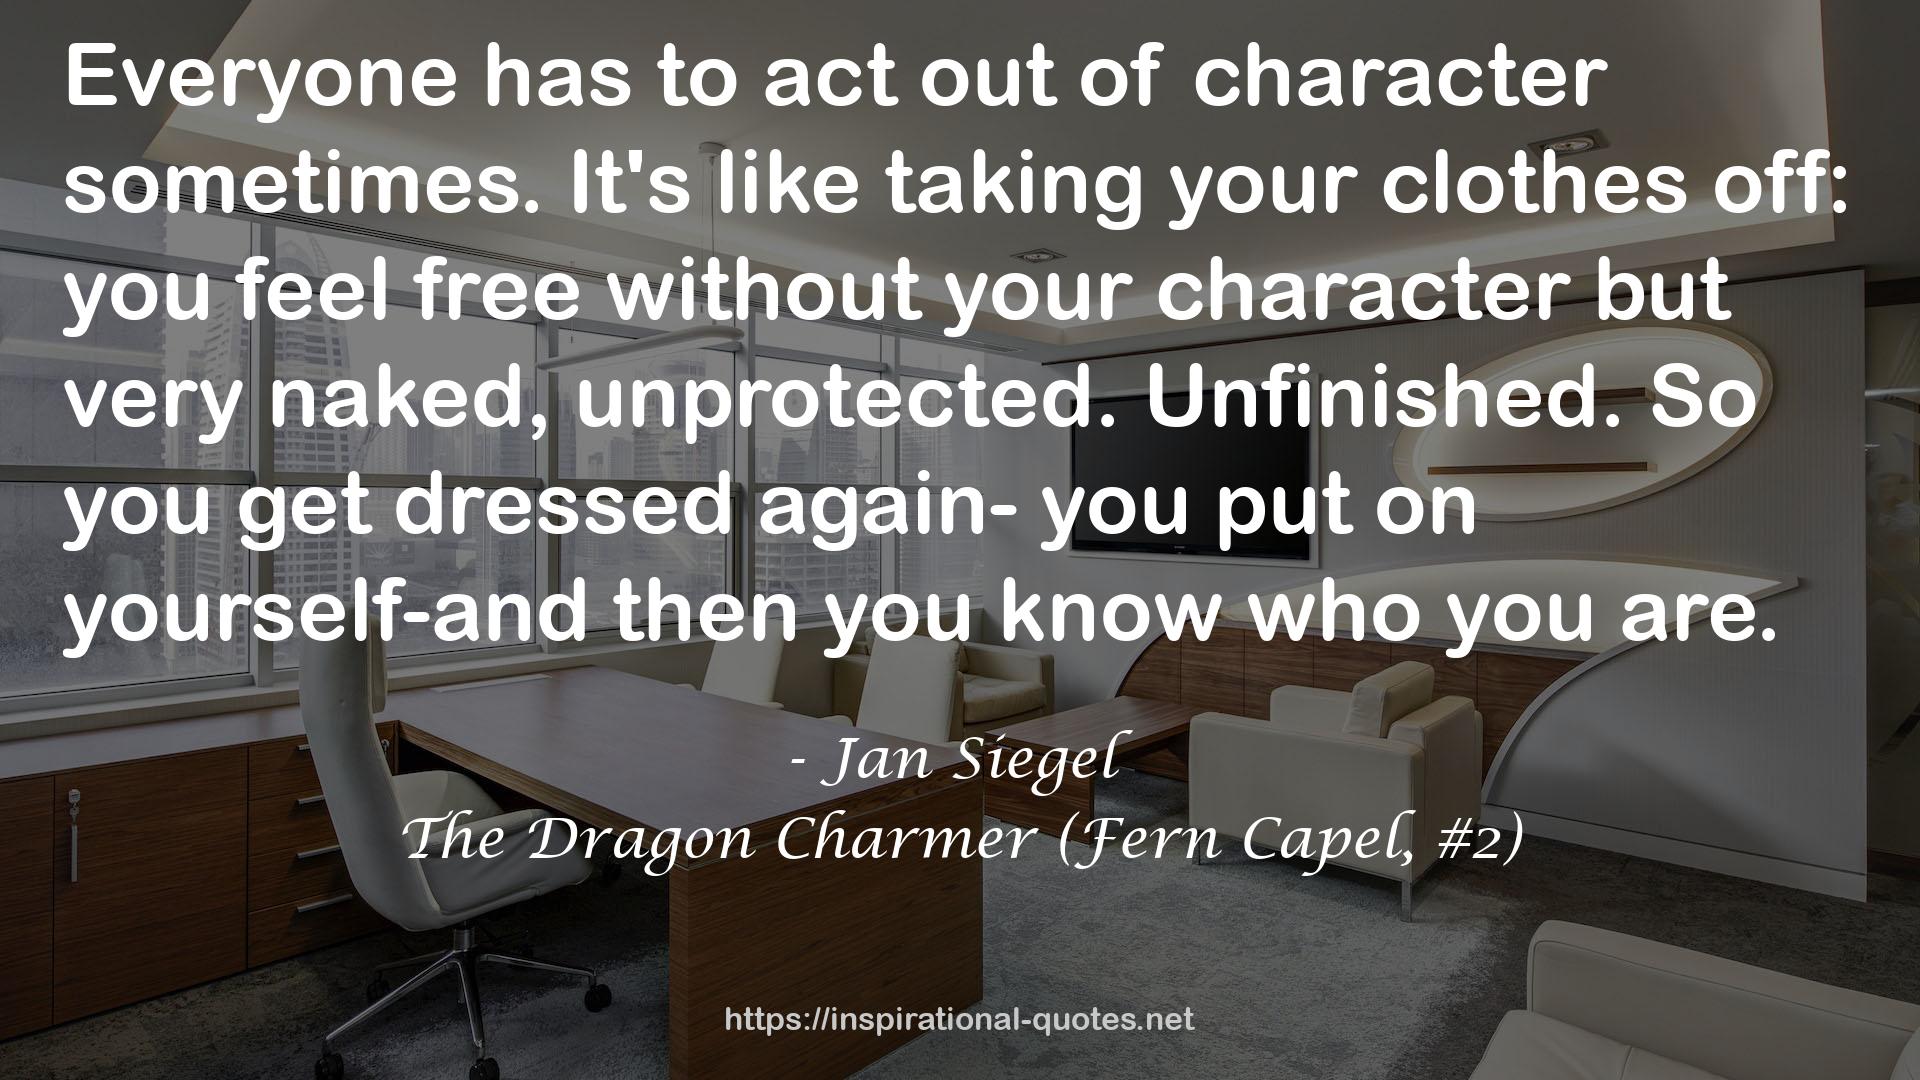 The Dragon Charmer (Fern Capel, #2) QUOTES